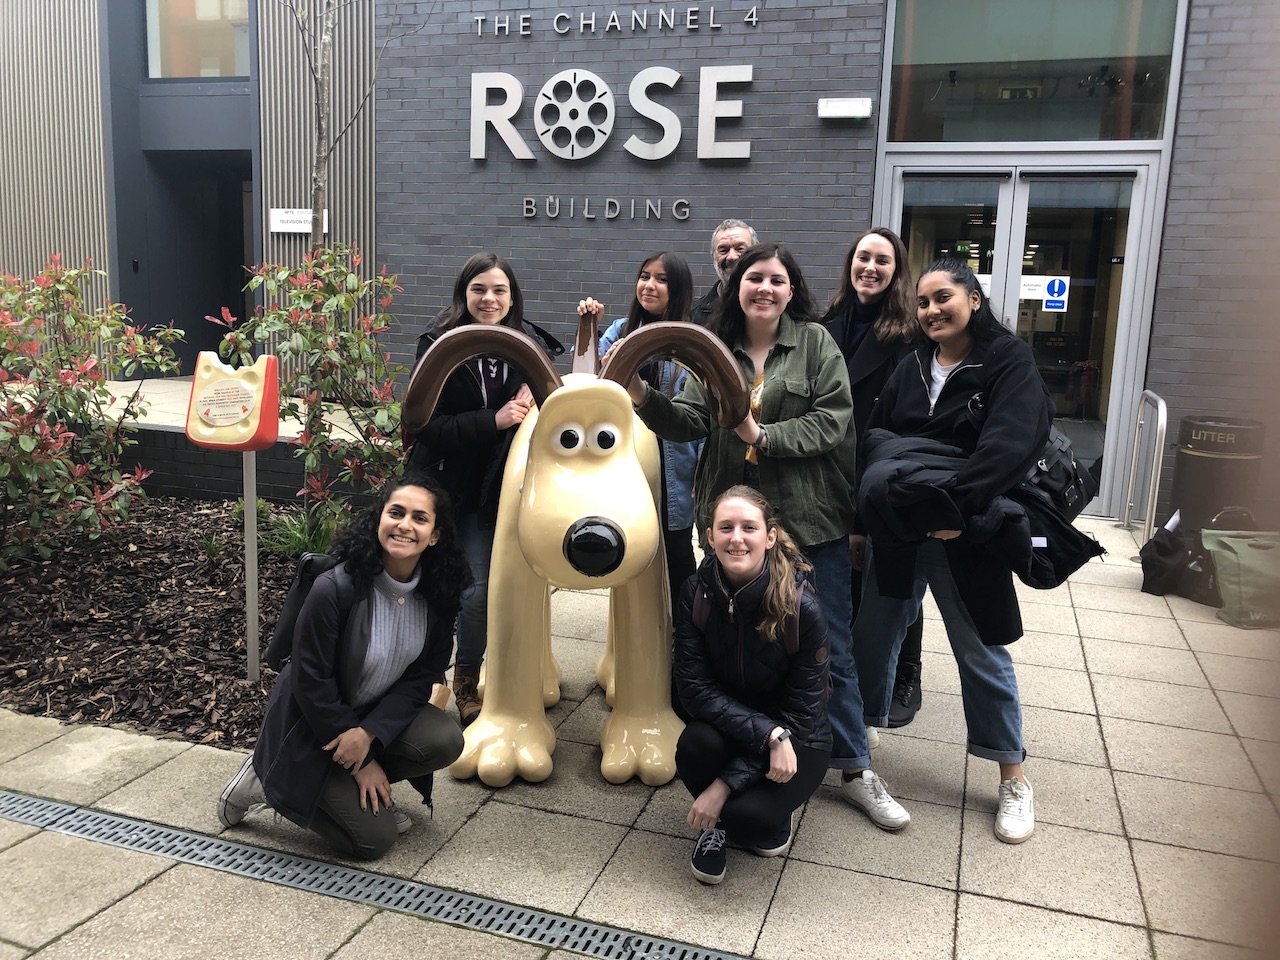 Group photo of the spring 2019 class with a statue of Gromit in front of the Channel 4 Rose Building